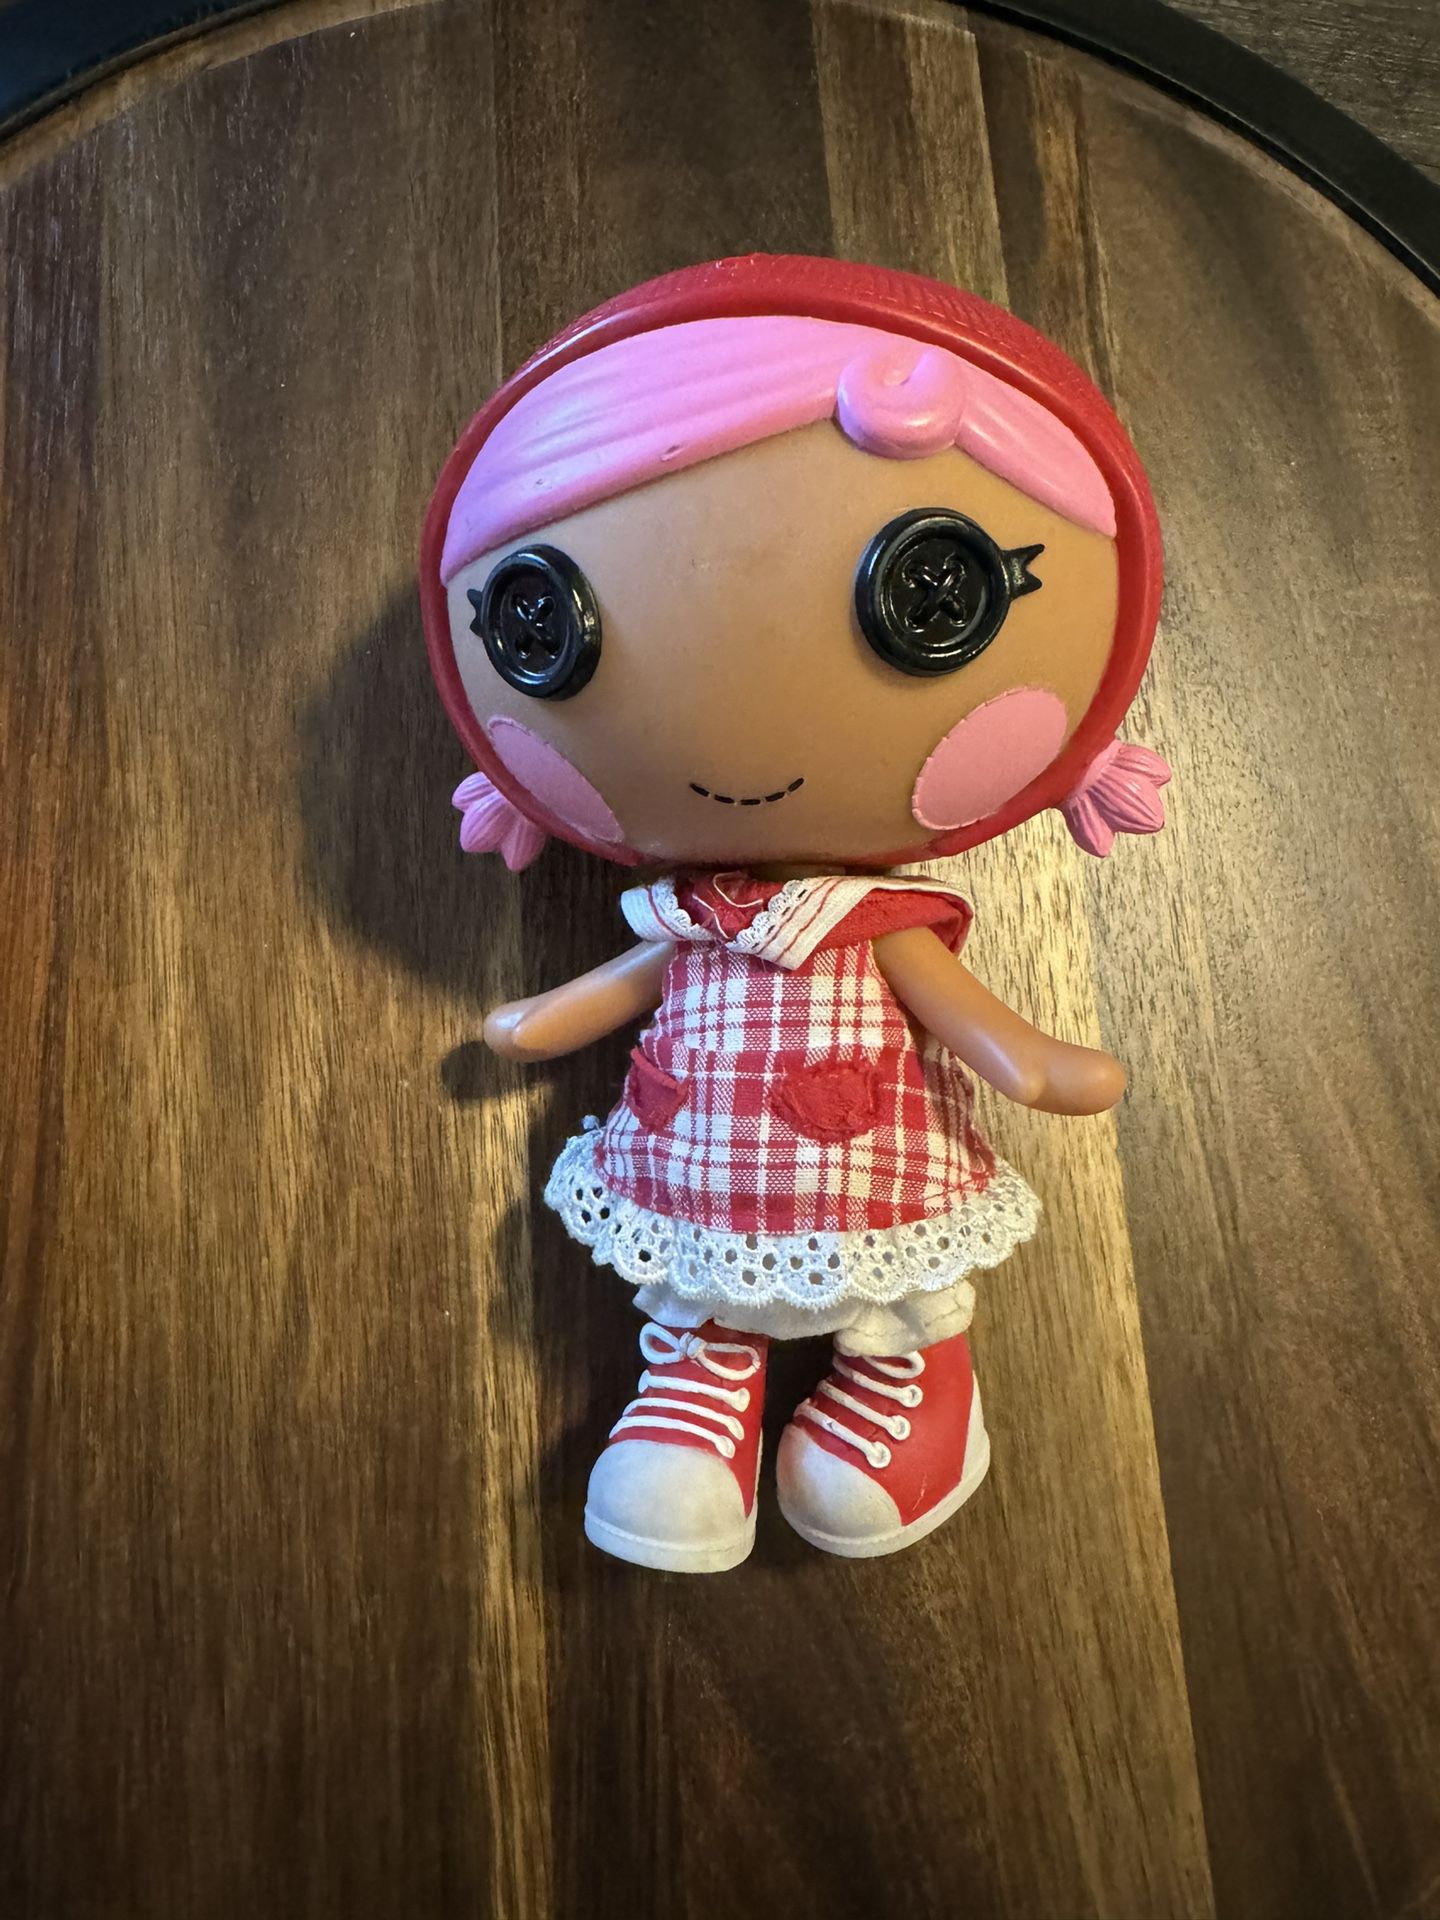 Lalaloopsy Littles, Red Riding Hood, Doll